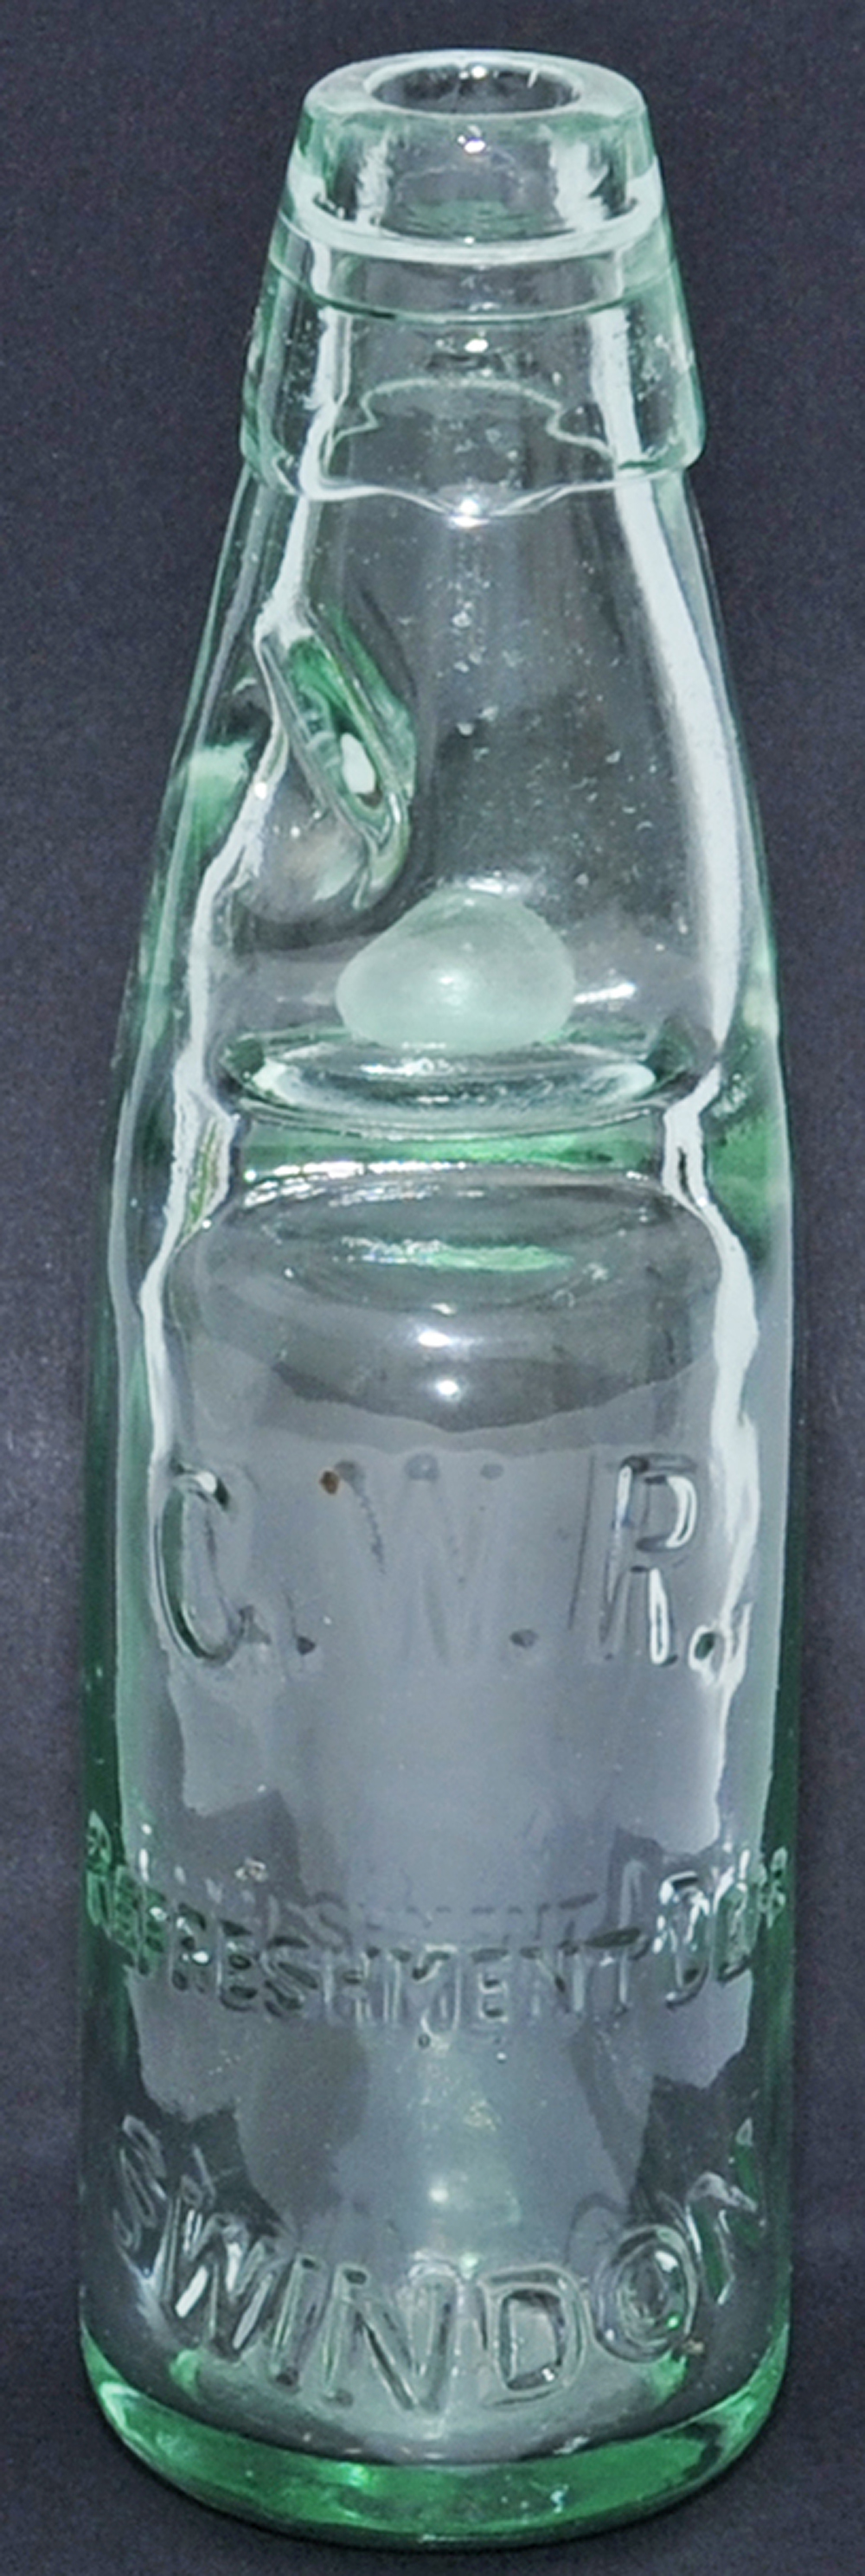 GWR Refreshment Department Swindon small Cod Bottle standing 7½" tall. A rare item in excellent